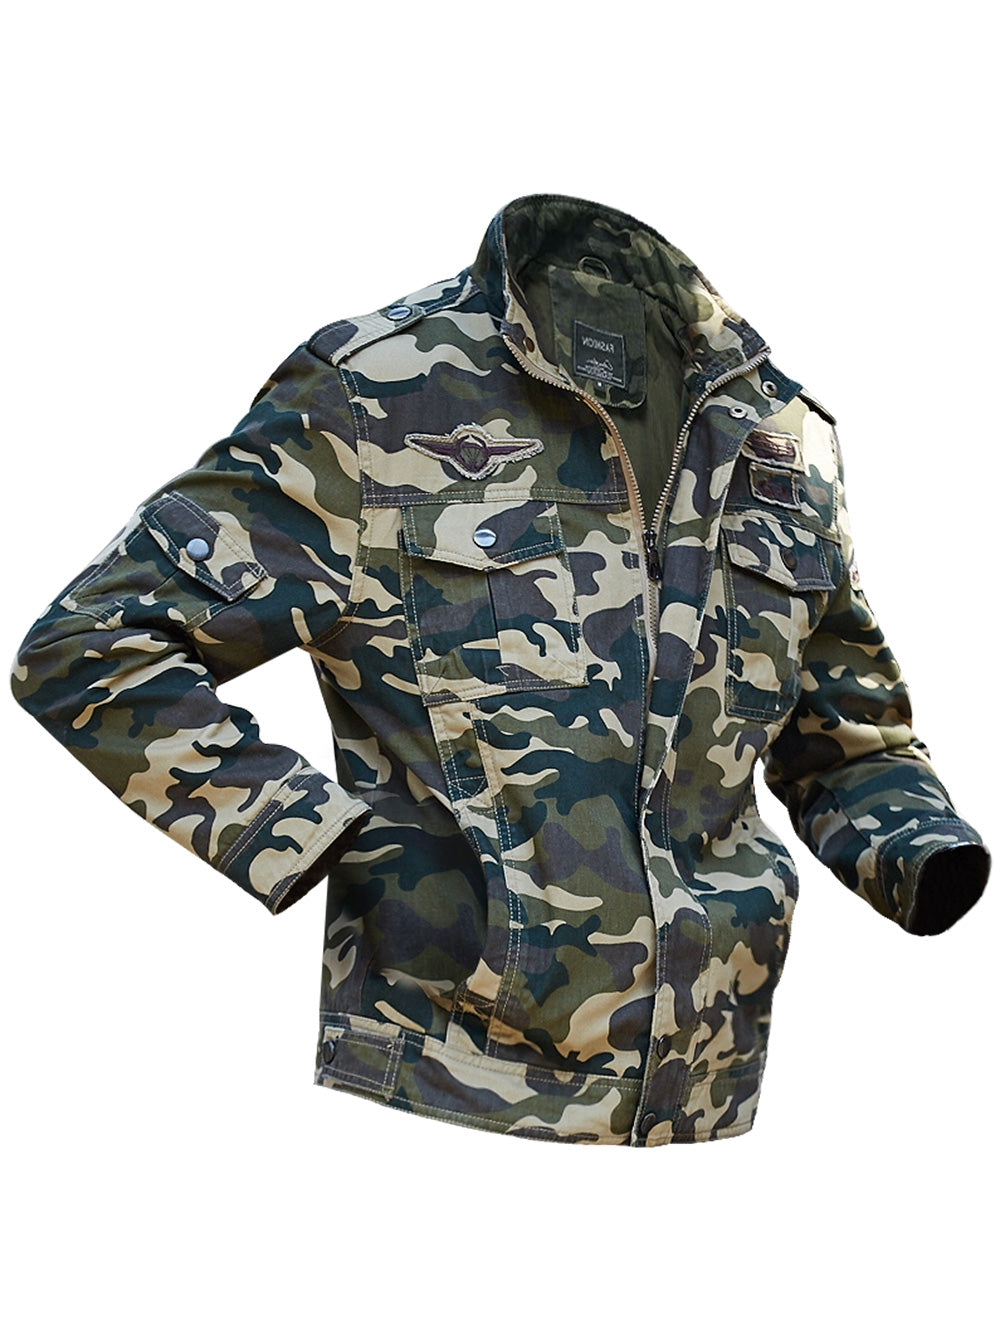 Men's Appliques Camouflage Printed Out Door Sports Jacket